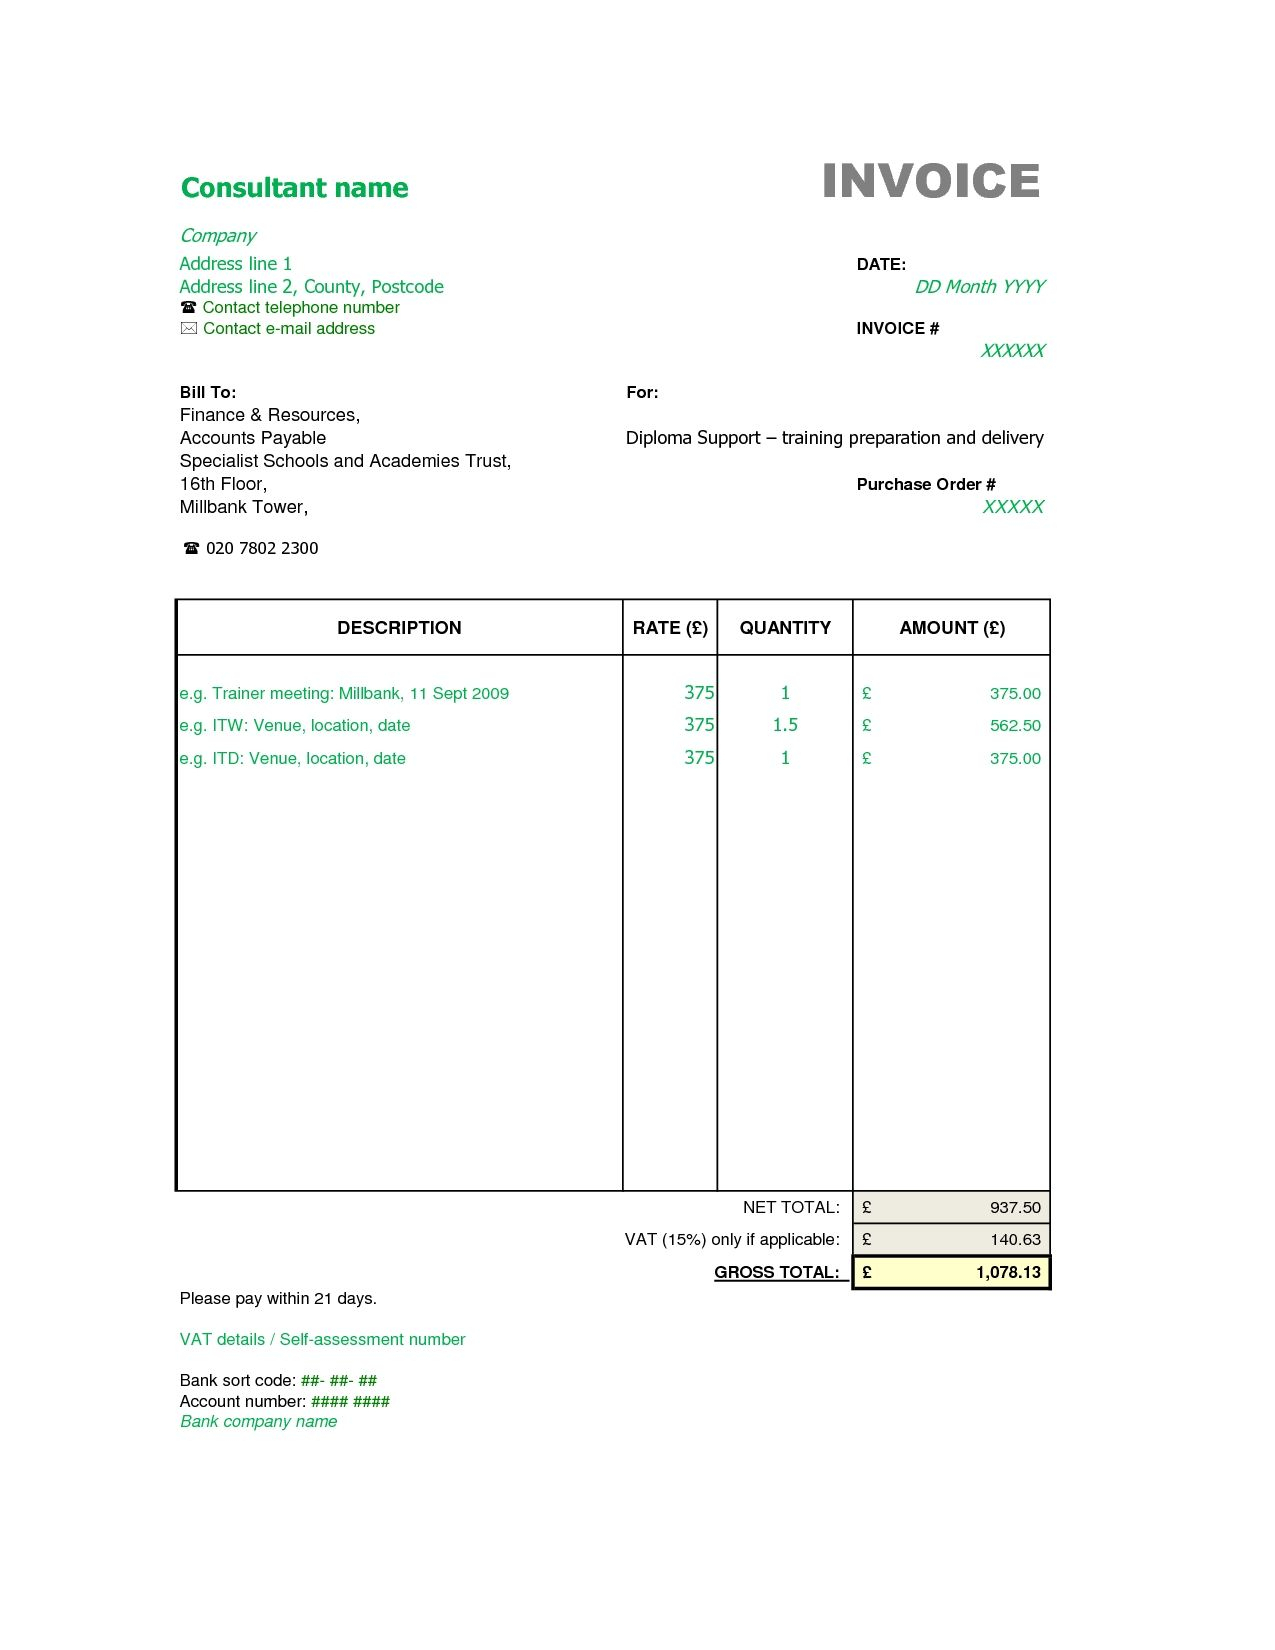 sample-consulting-invoice-template